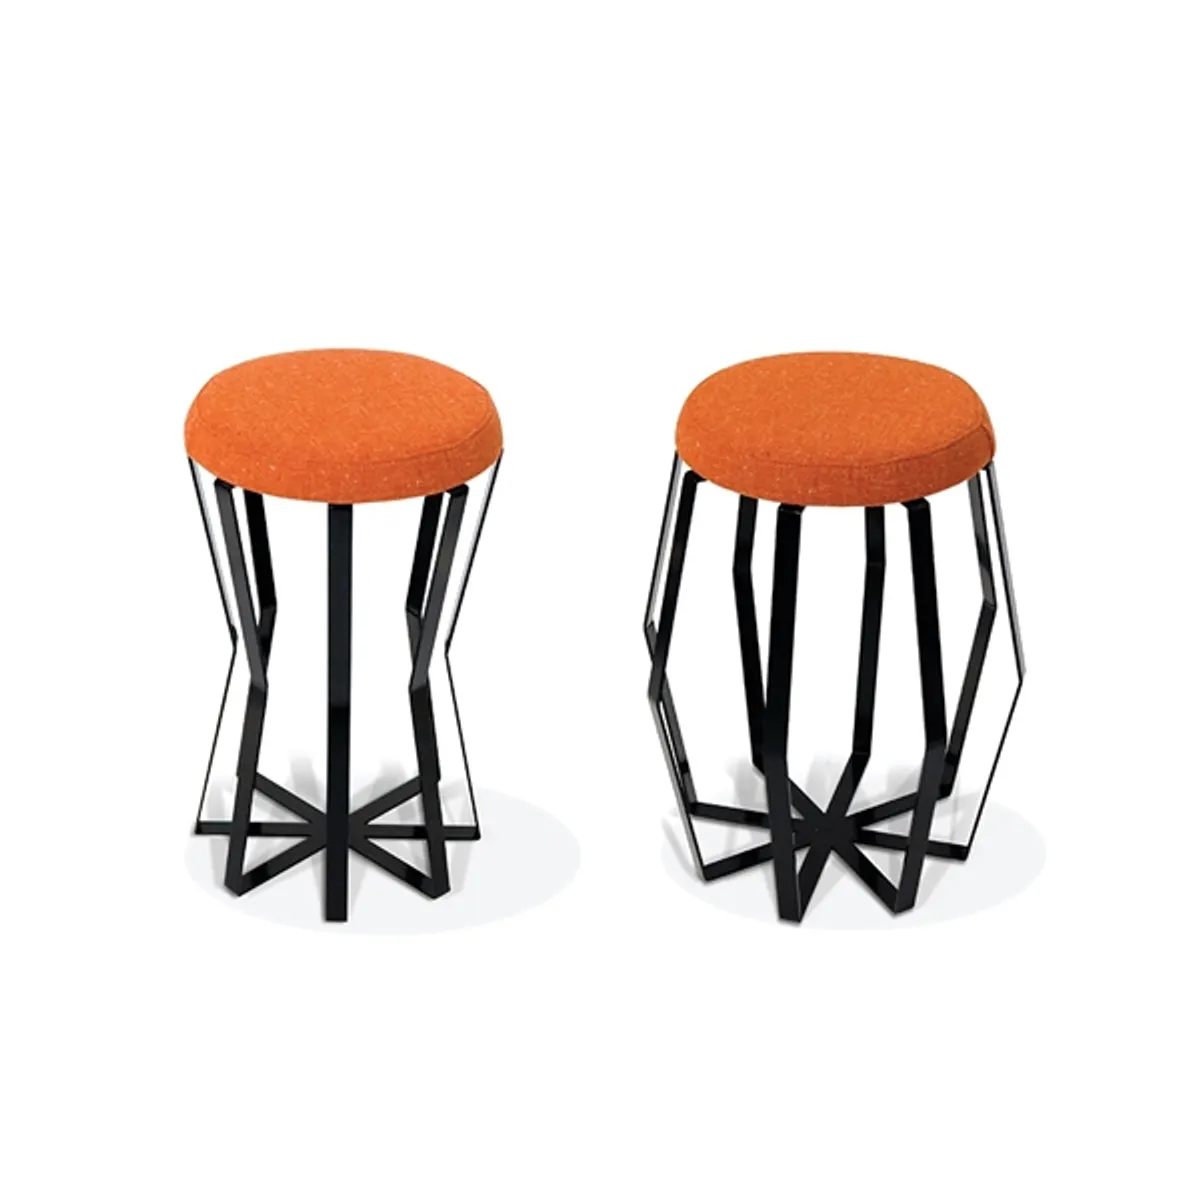 Asterisk stools Inside Out Contracts6